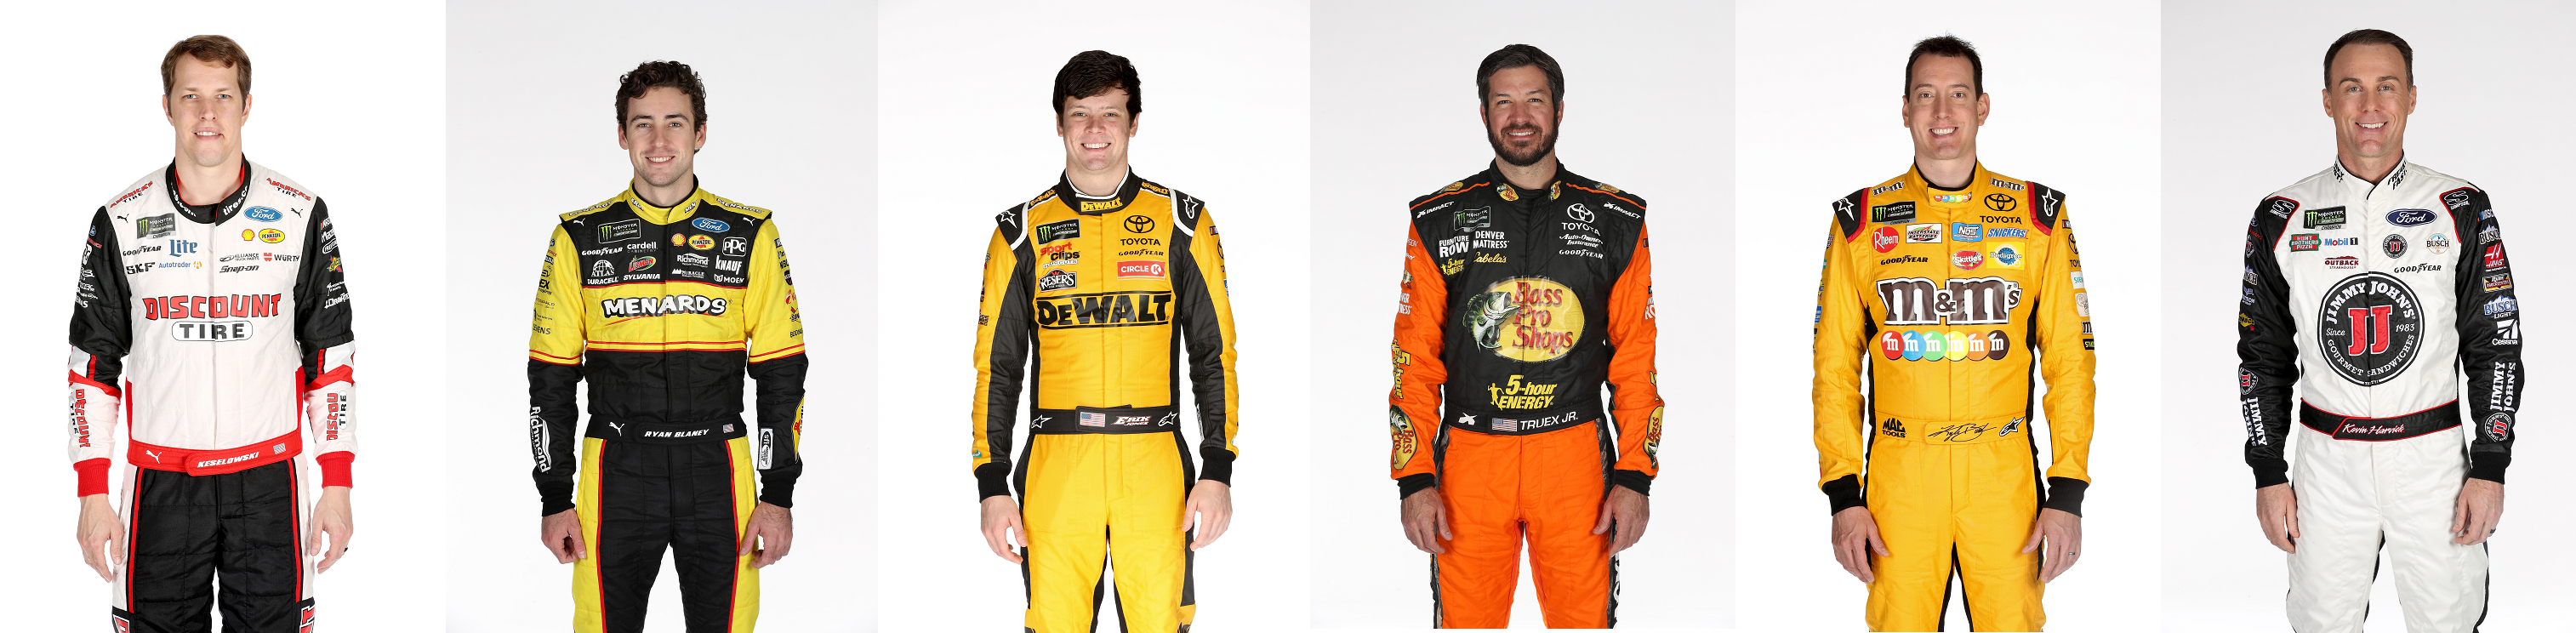 We're a little Team Penske, they're a little bit of Gibbs and Furniture Row.